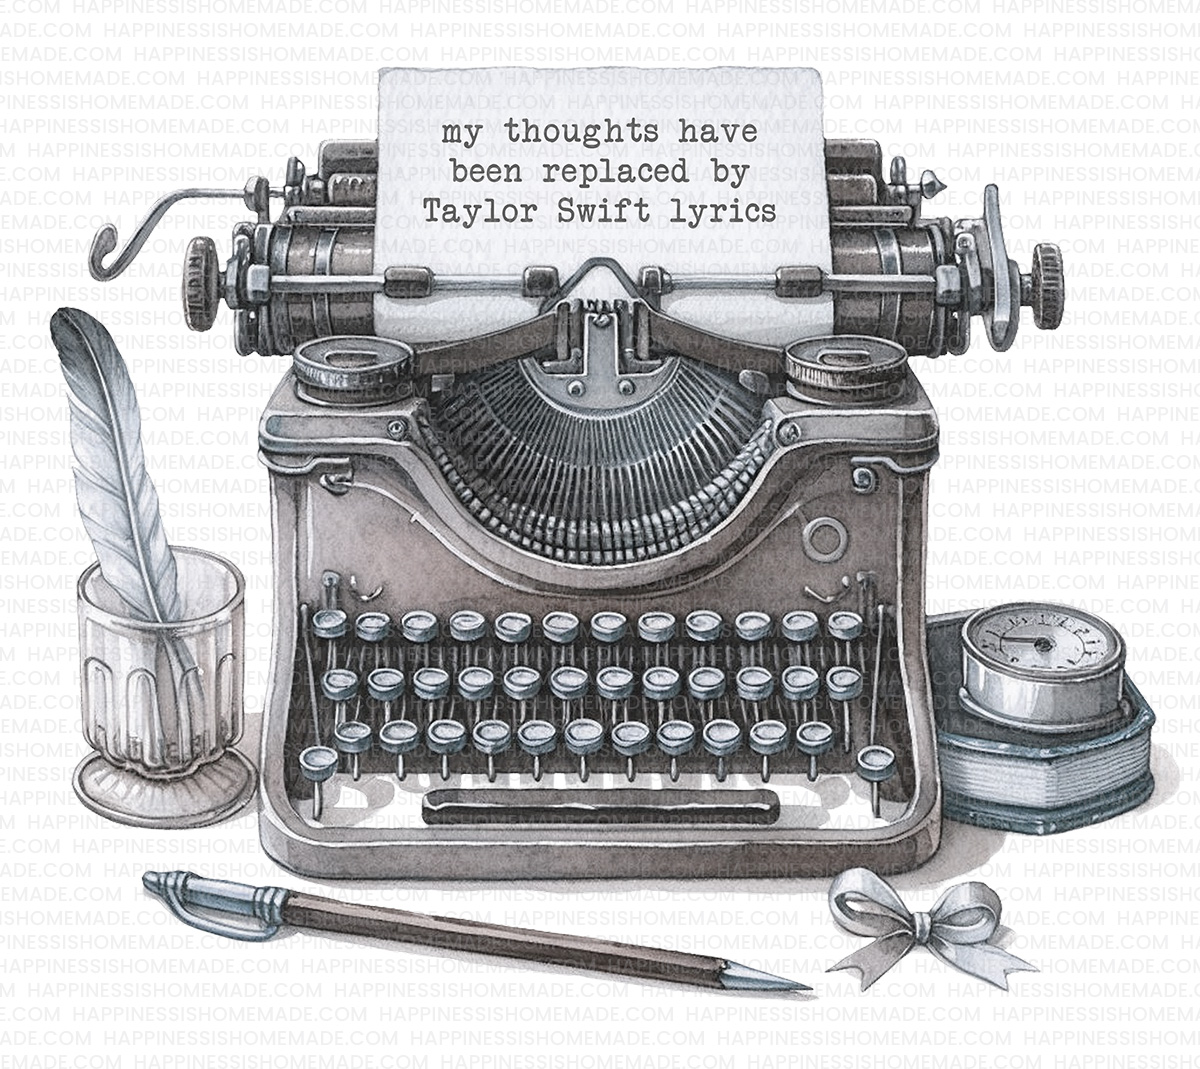 Typewriter and quill pen graphic with "my thoughts have been replace by Taylor Swift lyrics" written on the typewriter page